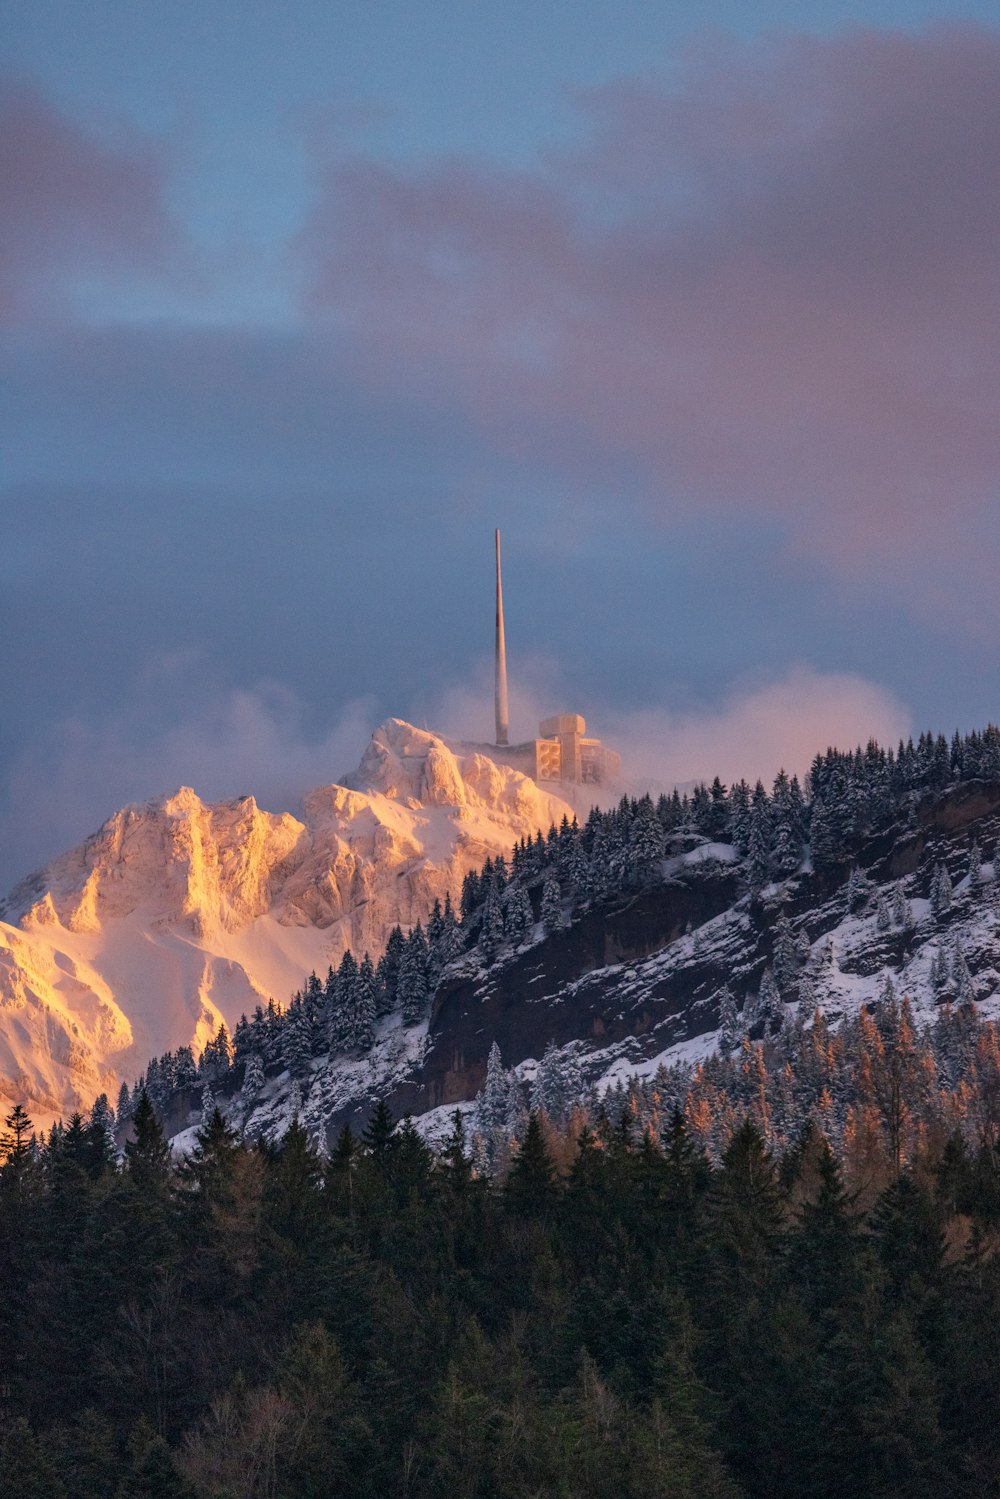 a mountain covered in snow with a radio tower in the distance